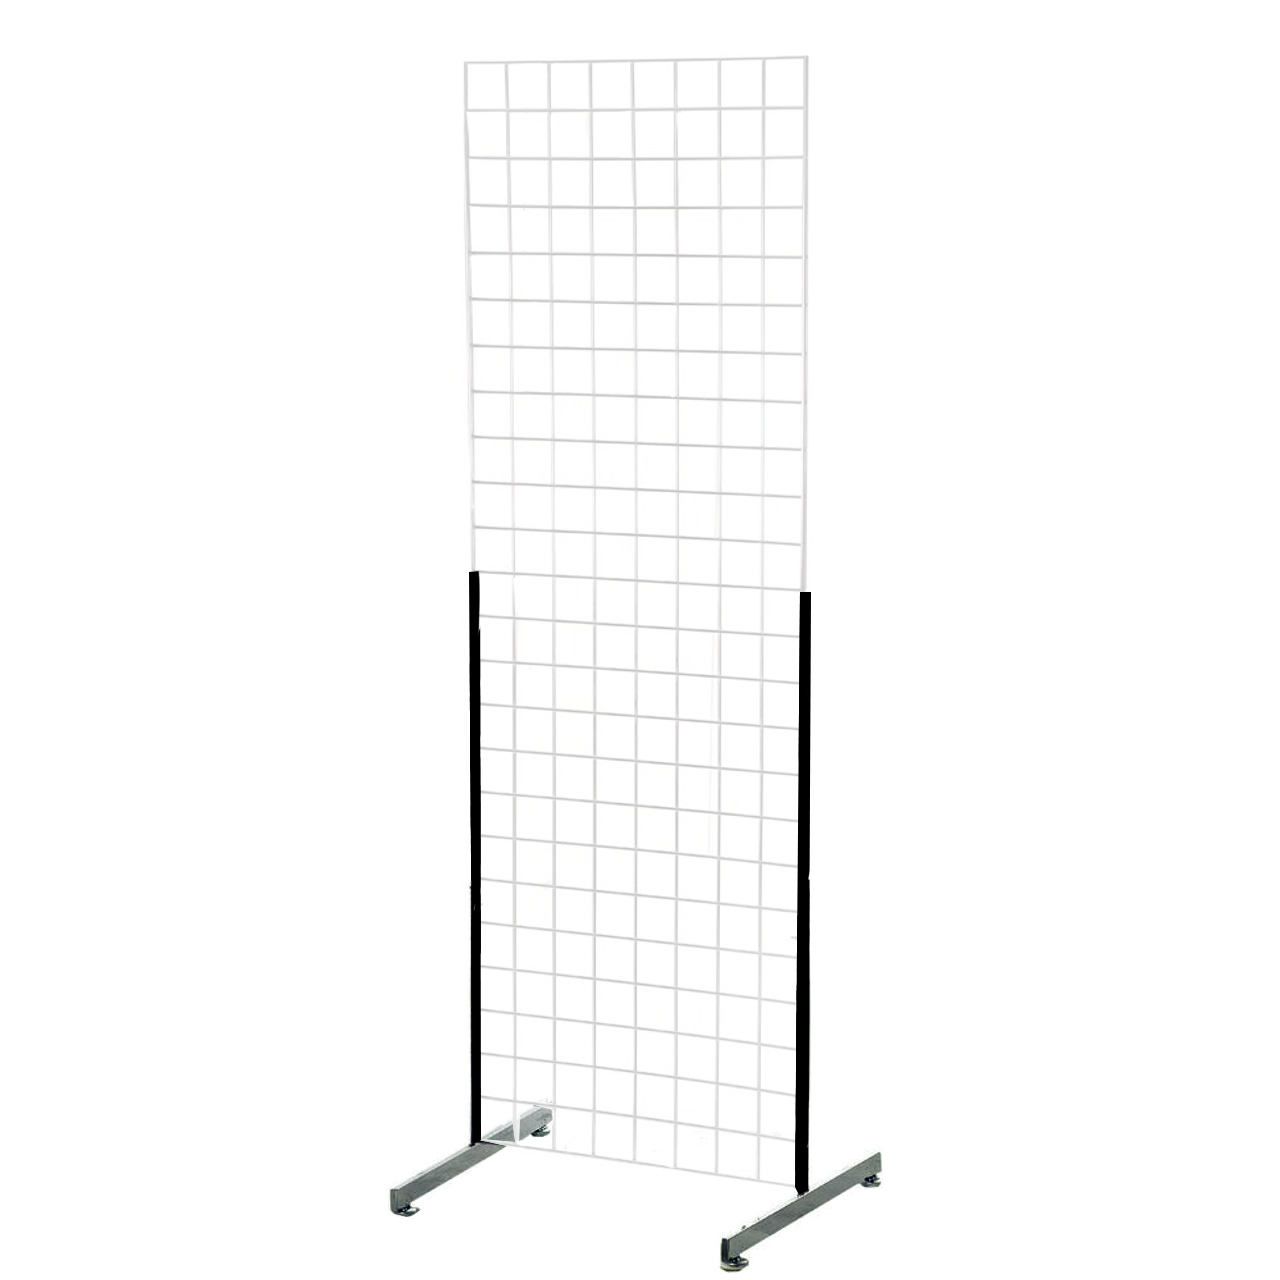 T-Leg Grid Stand - Grid System (Set of 2)